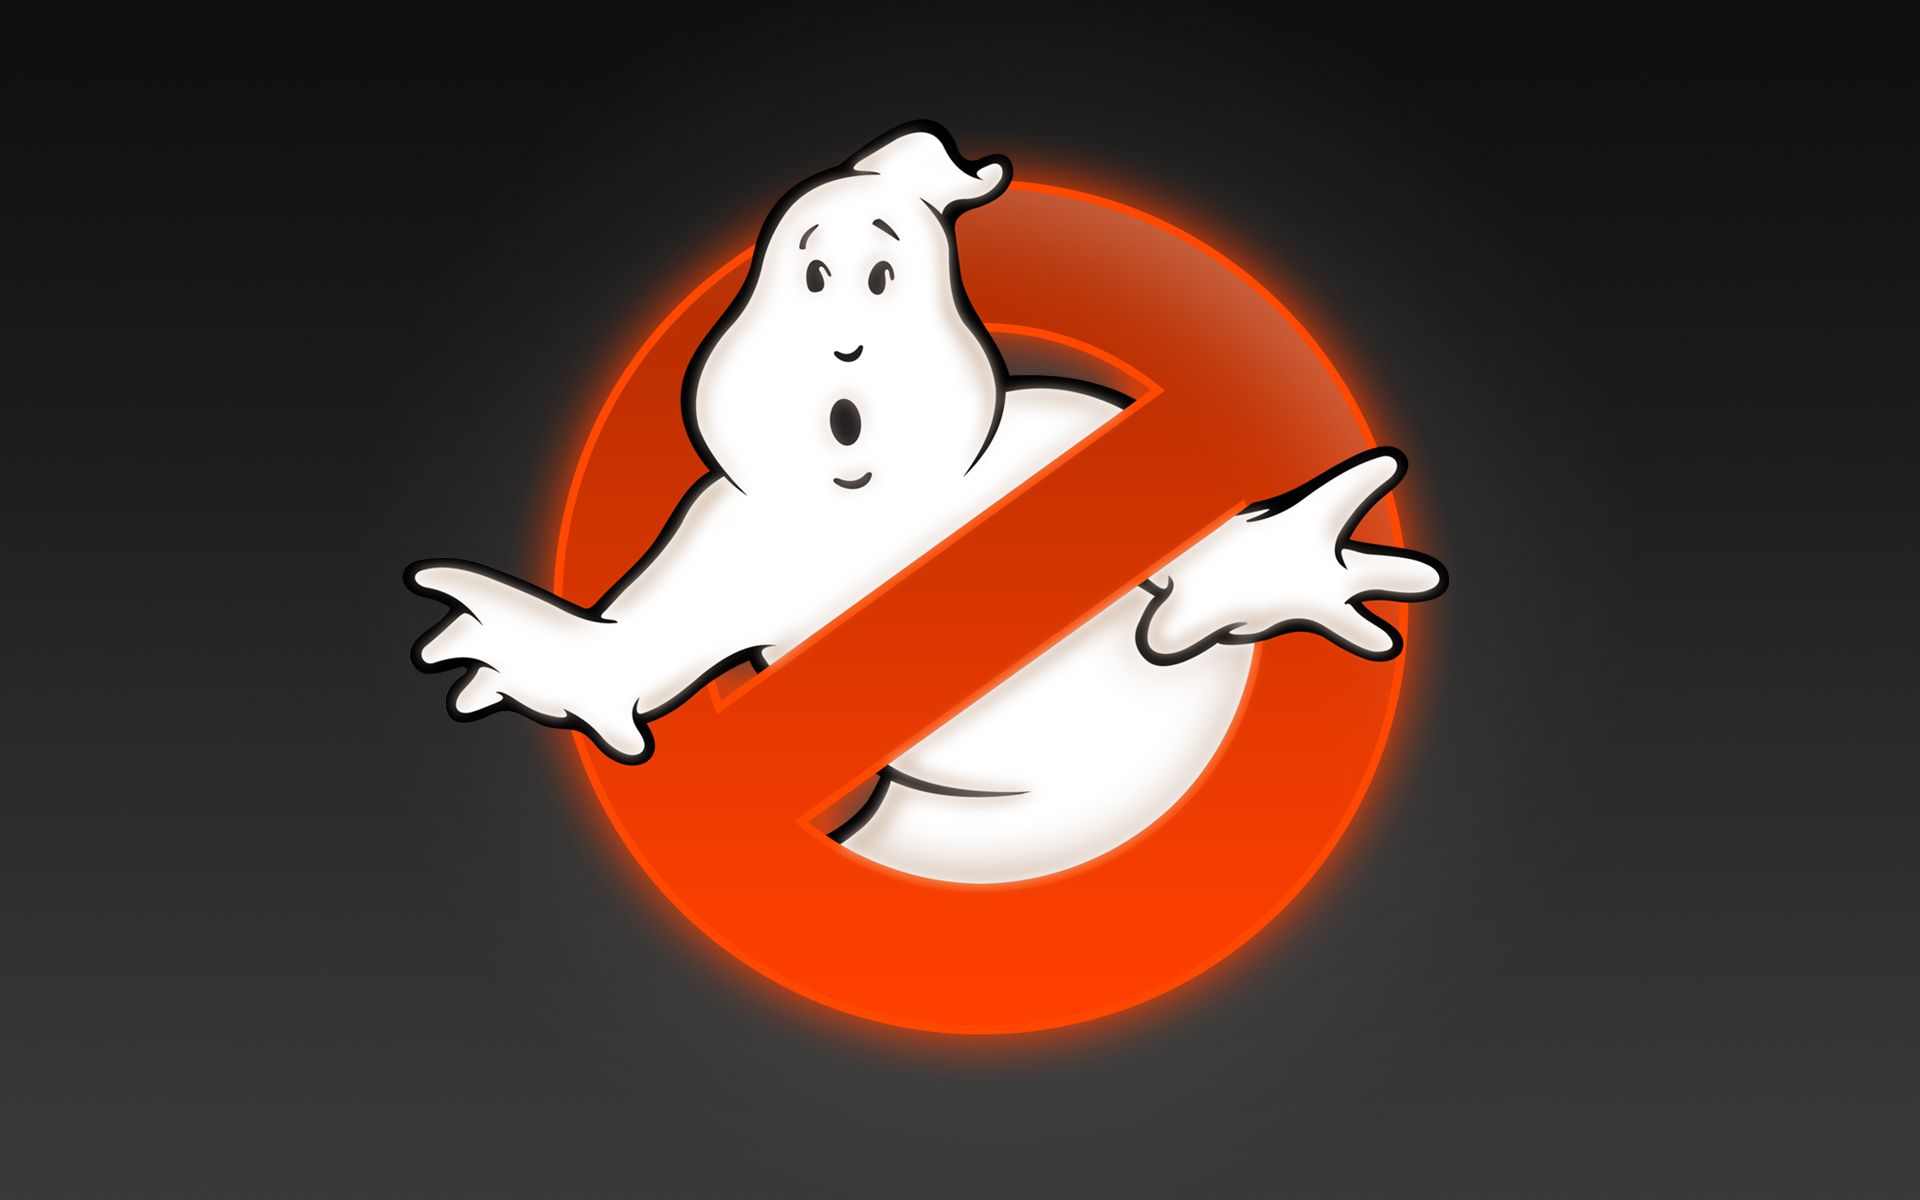 Ghostbusters Wallpaper | Flickr - Photo Sharing!